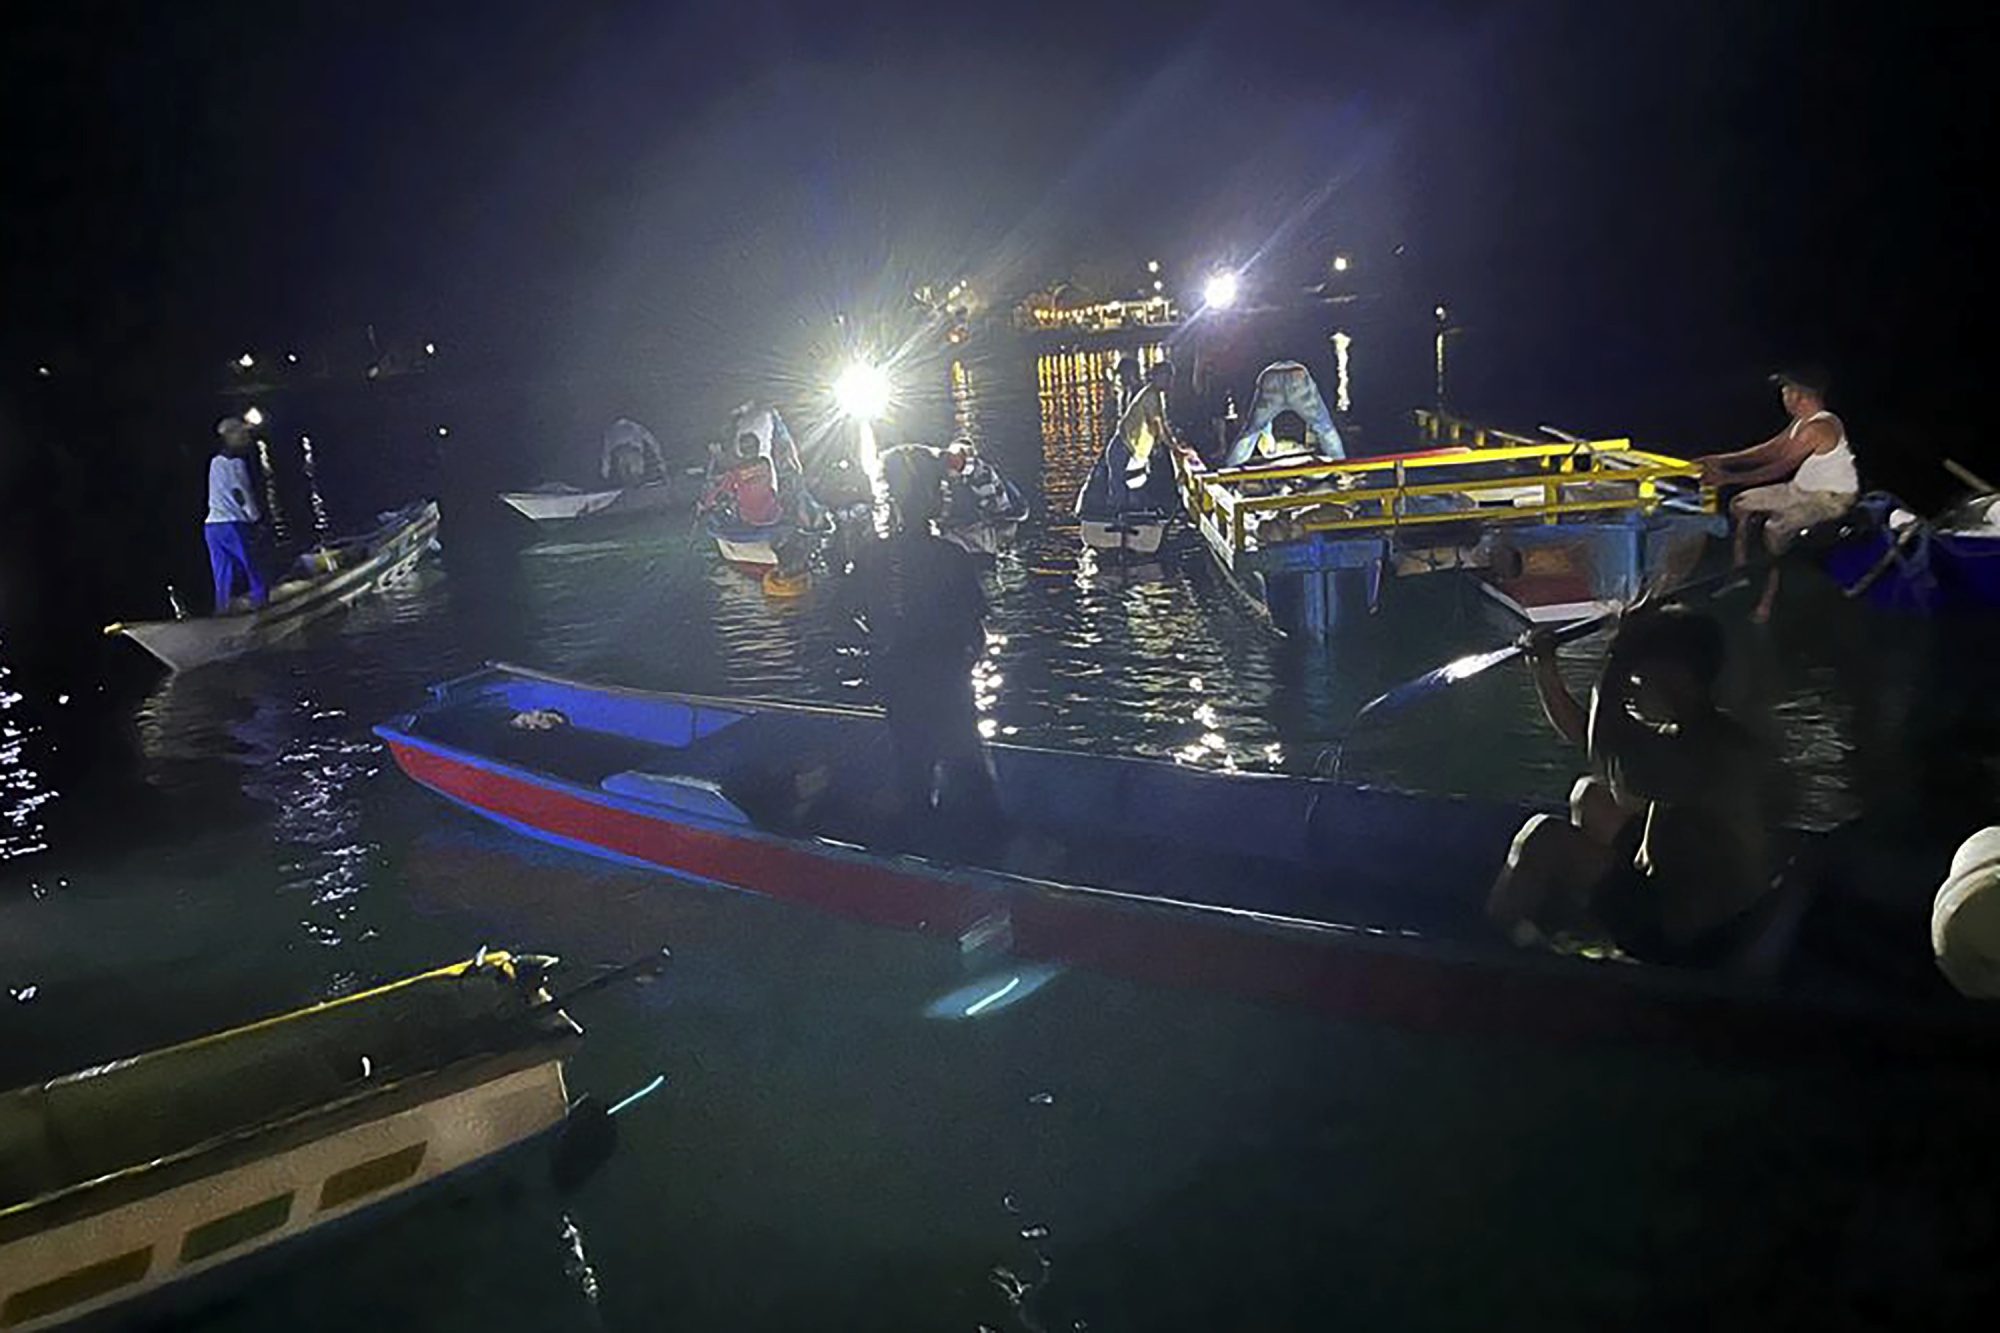 Fatal Capsizing: 2 Dead, 24 Missing in Indonesia Boat Incident